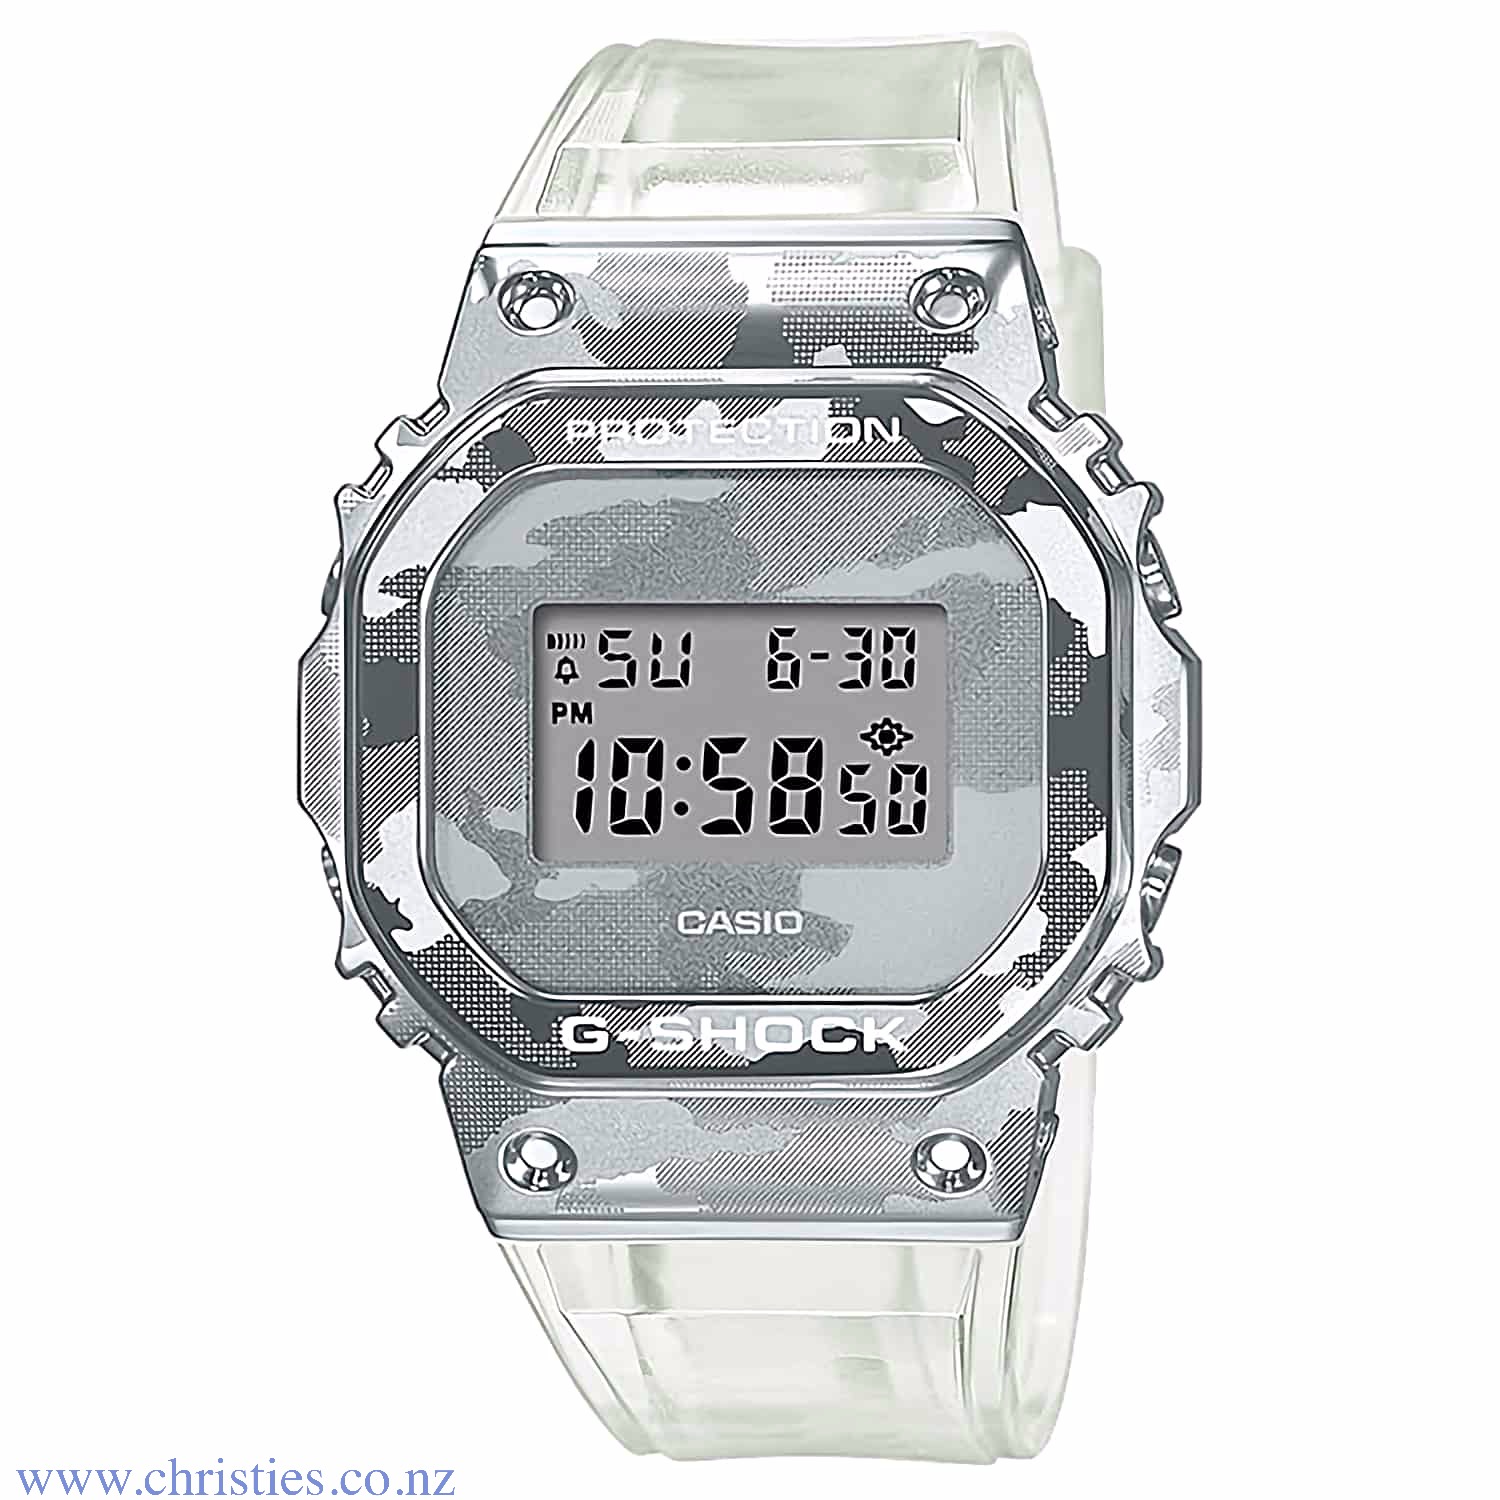 GM5600SCM-1 G-Shock Metal Bezel Watch. This new G-SHOCK Metal Covered Series includes the GM-110, GM-5600, and GM-6900 with a fashionable semi-transparent band and camouflage pattern. The bezel is forged, cut, and polished and then given a camouflage patt